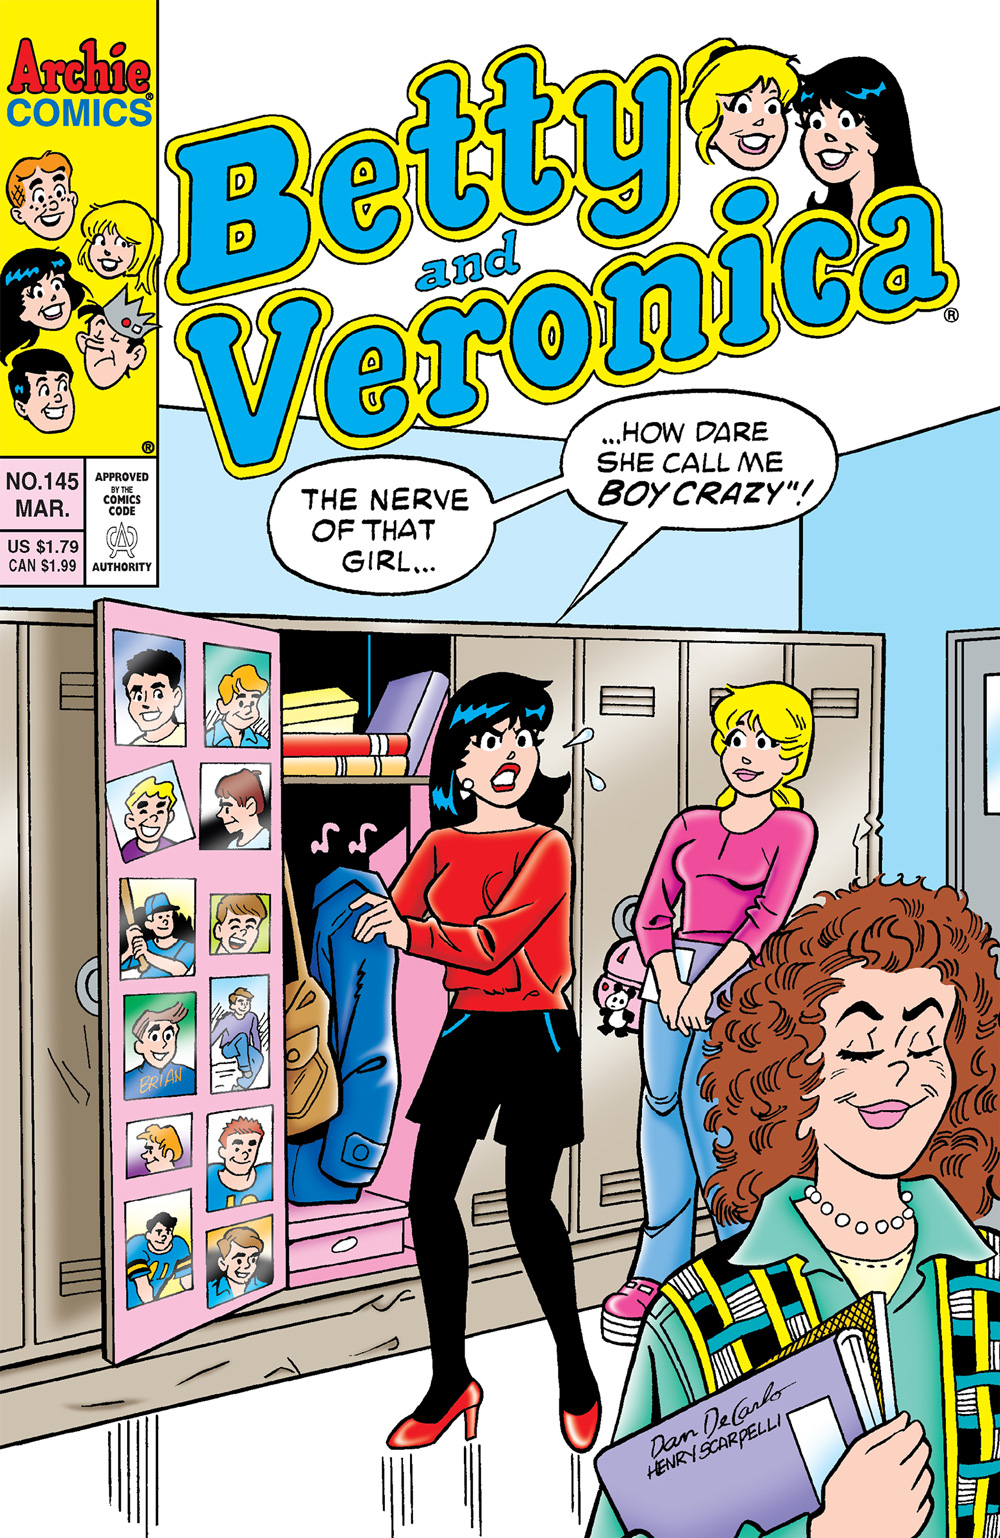 Betty and Veronica are at Veronica's locker in school. Veronica is mad that another girl said she's boy crazy, but meanwhile, we can see that her locker is covered with photos of boys she likes.